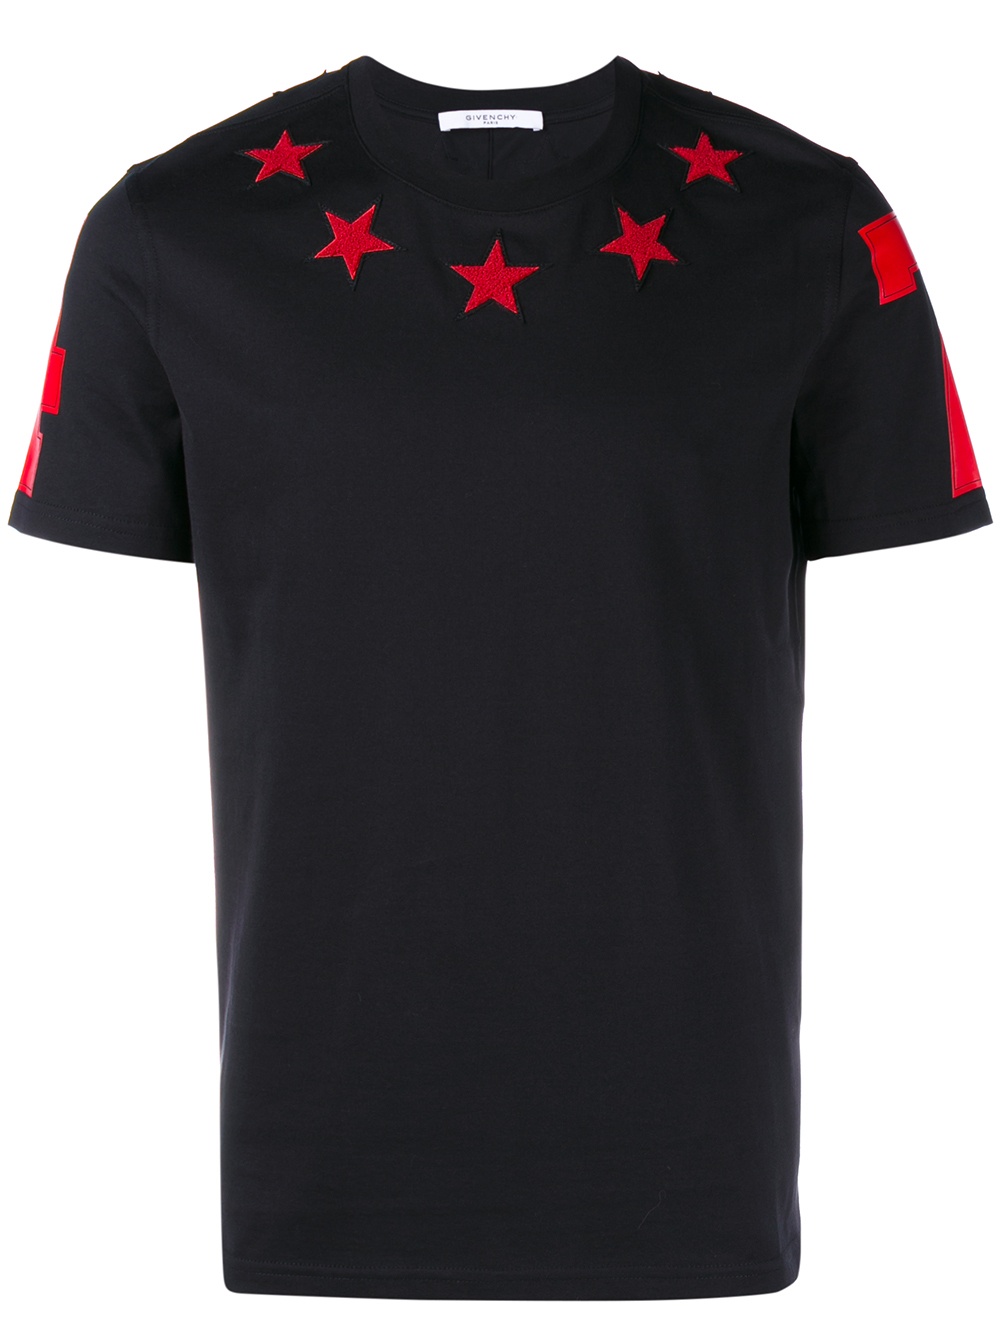 givenchy red star